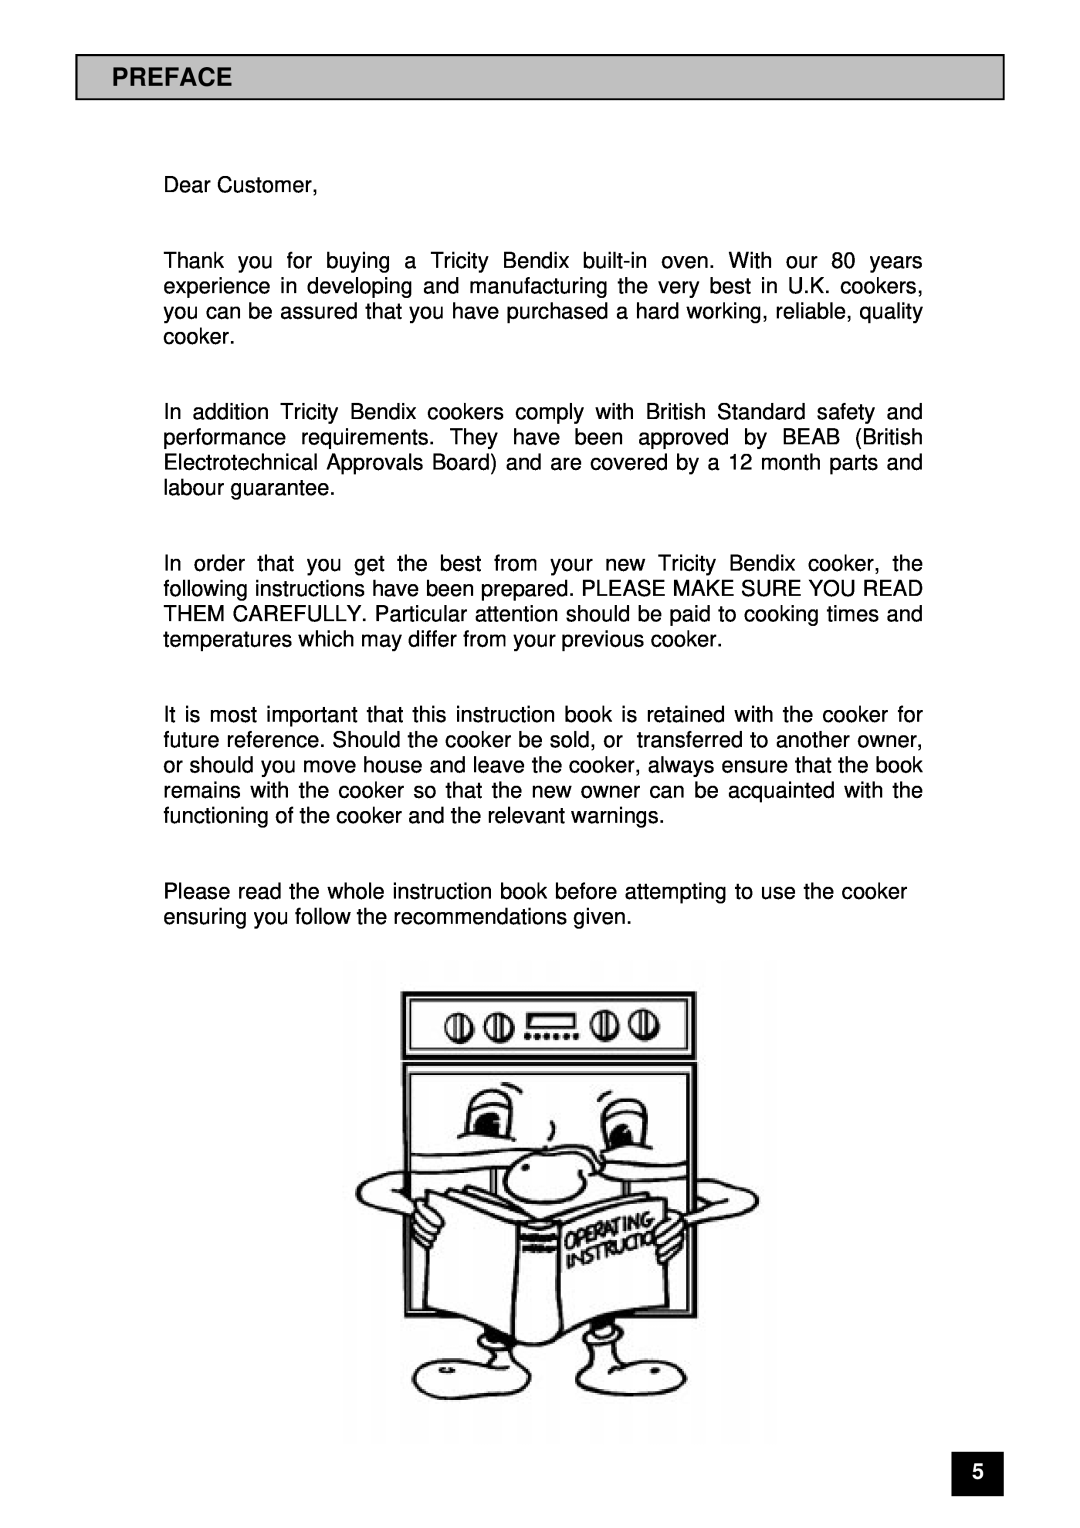 Tricity Bendix BS 611/BS 621 installation instructions Preface 